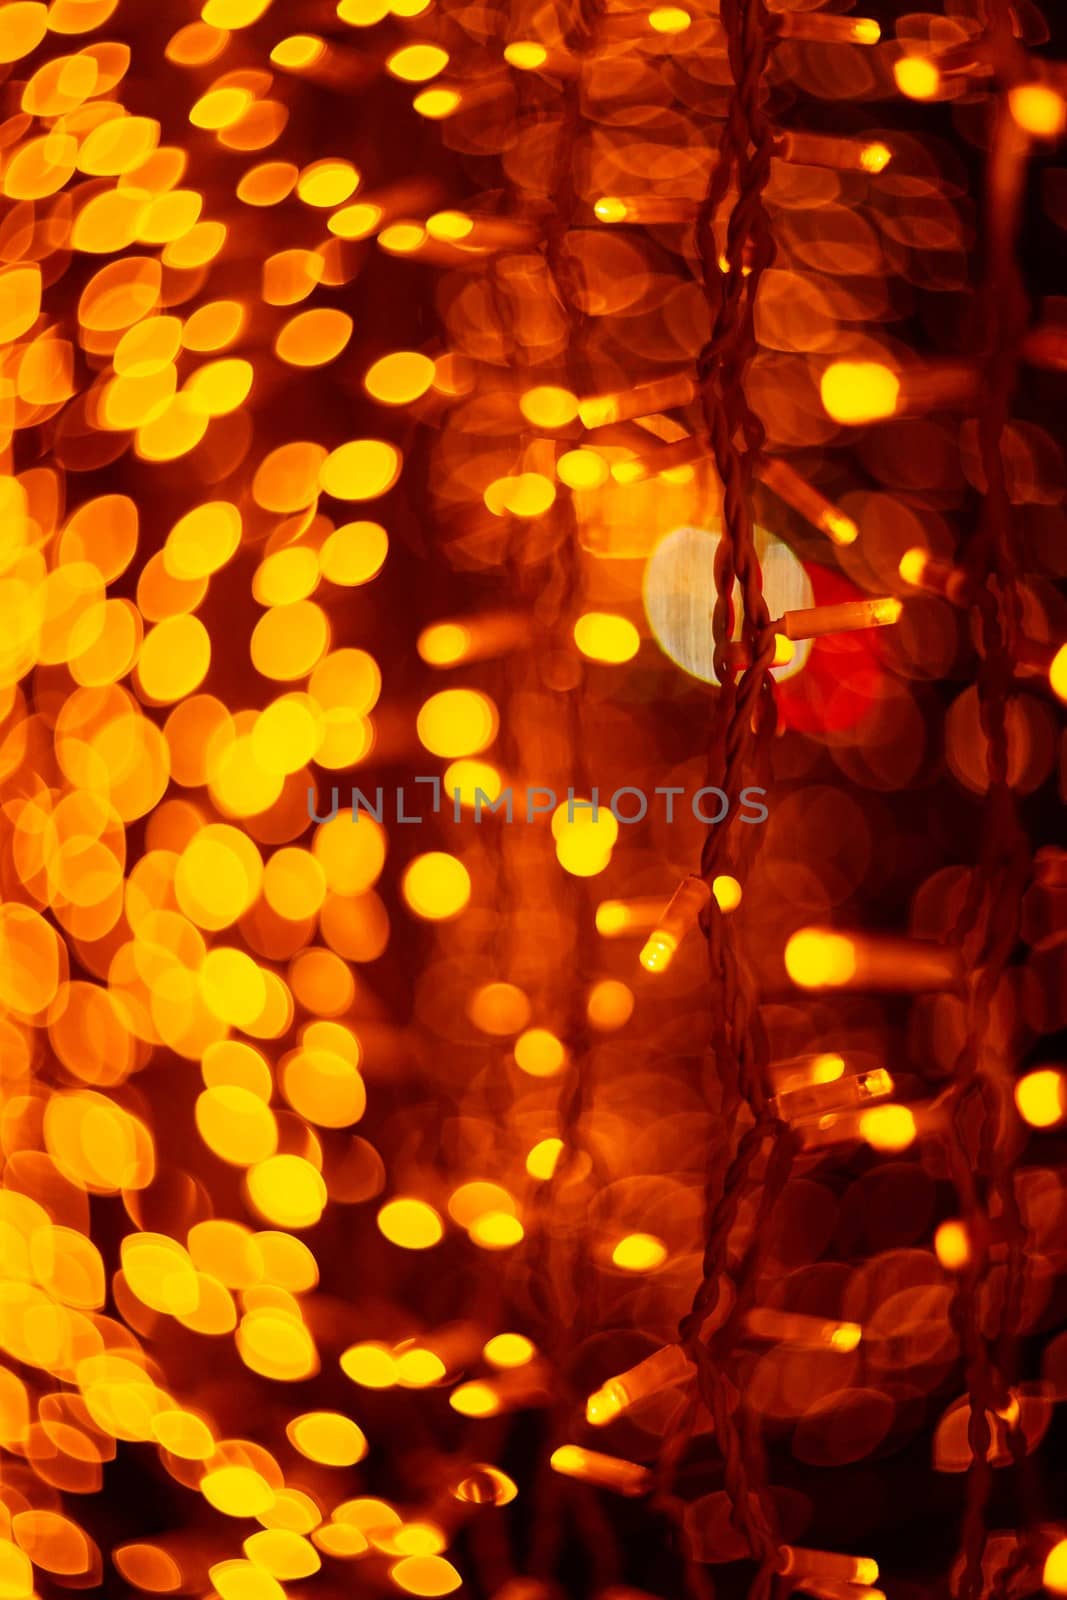 Vertical Christmas garland wall on glass window. Light is orange and defocused. Blurred background, new year mood.